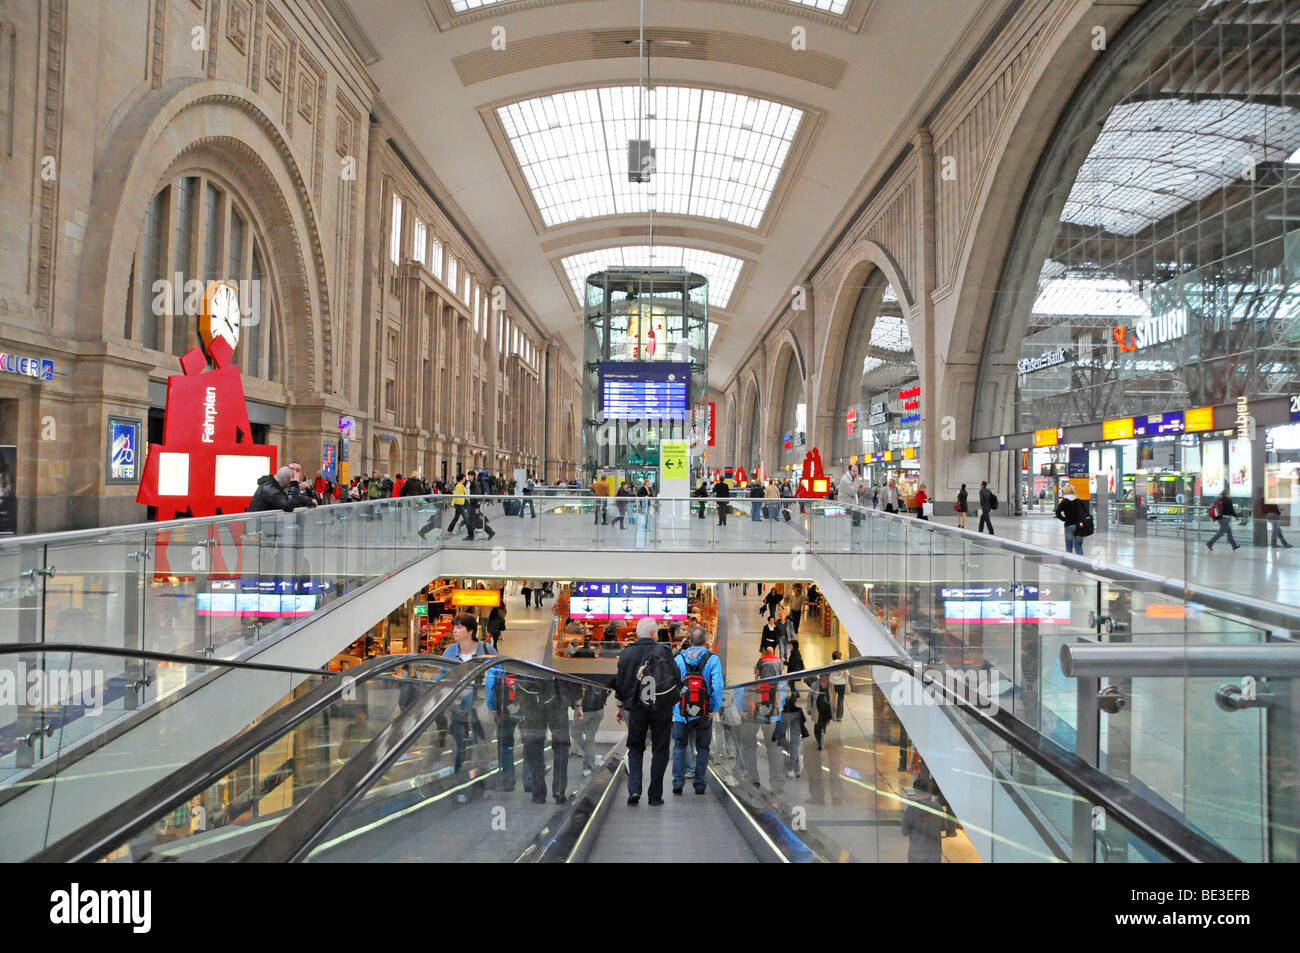 Central Station, interior view, Leipzig, Saxony, Germany, Europe Stock Photo